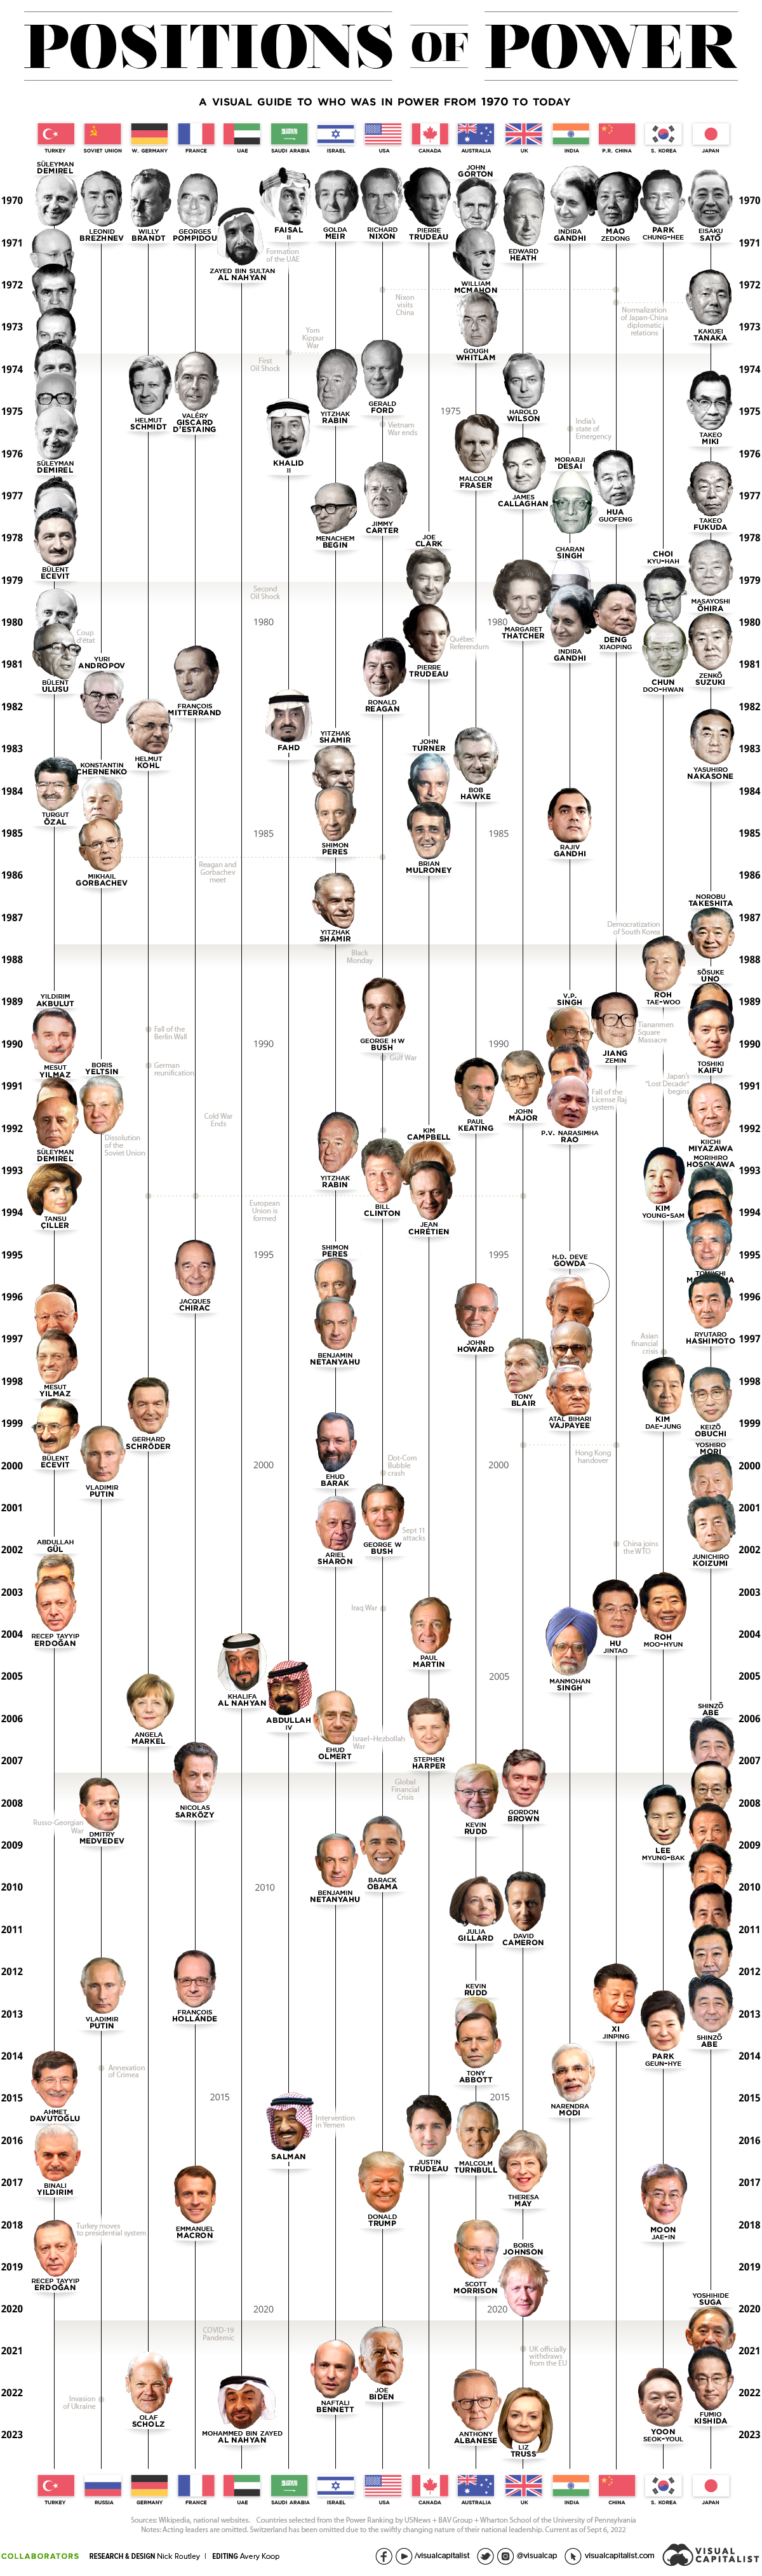 infographic showing world leaders in positions of power